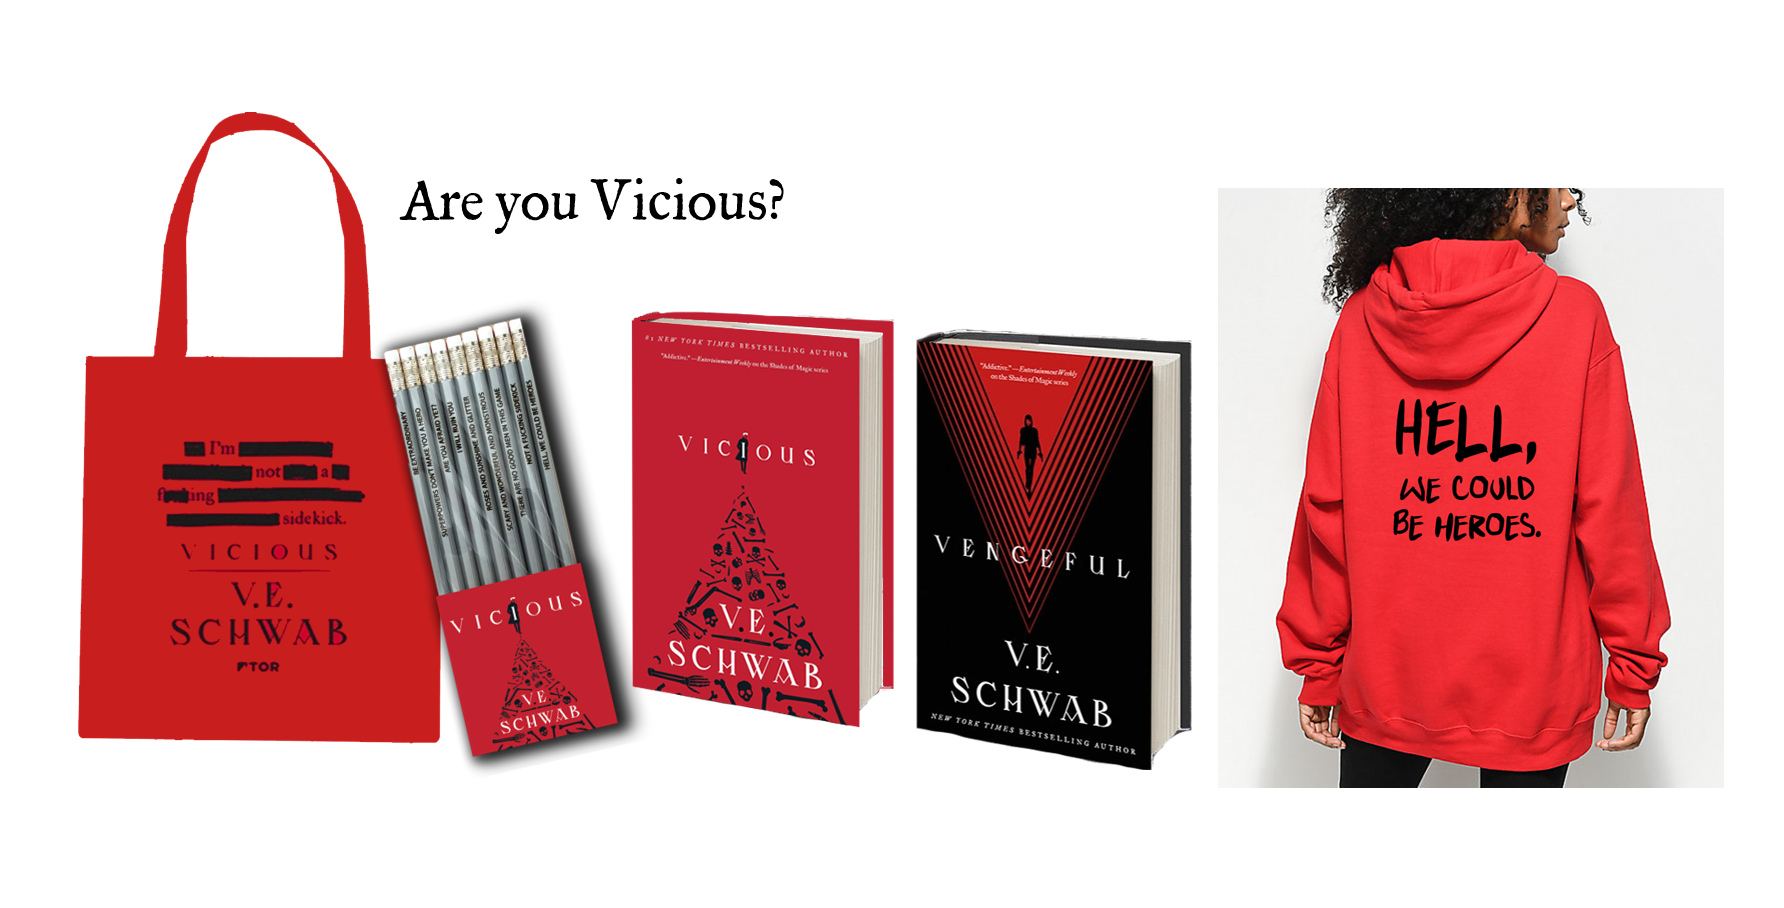 Are you VICIOUS or VENGEFUL? Enter to win a #VillainsSeries prize pack from Tor Books